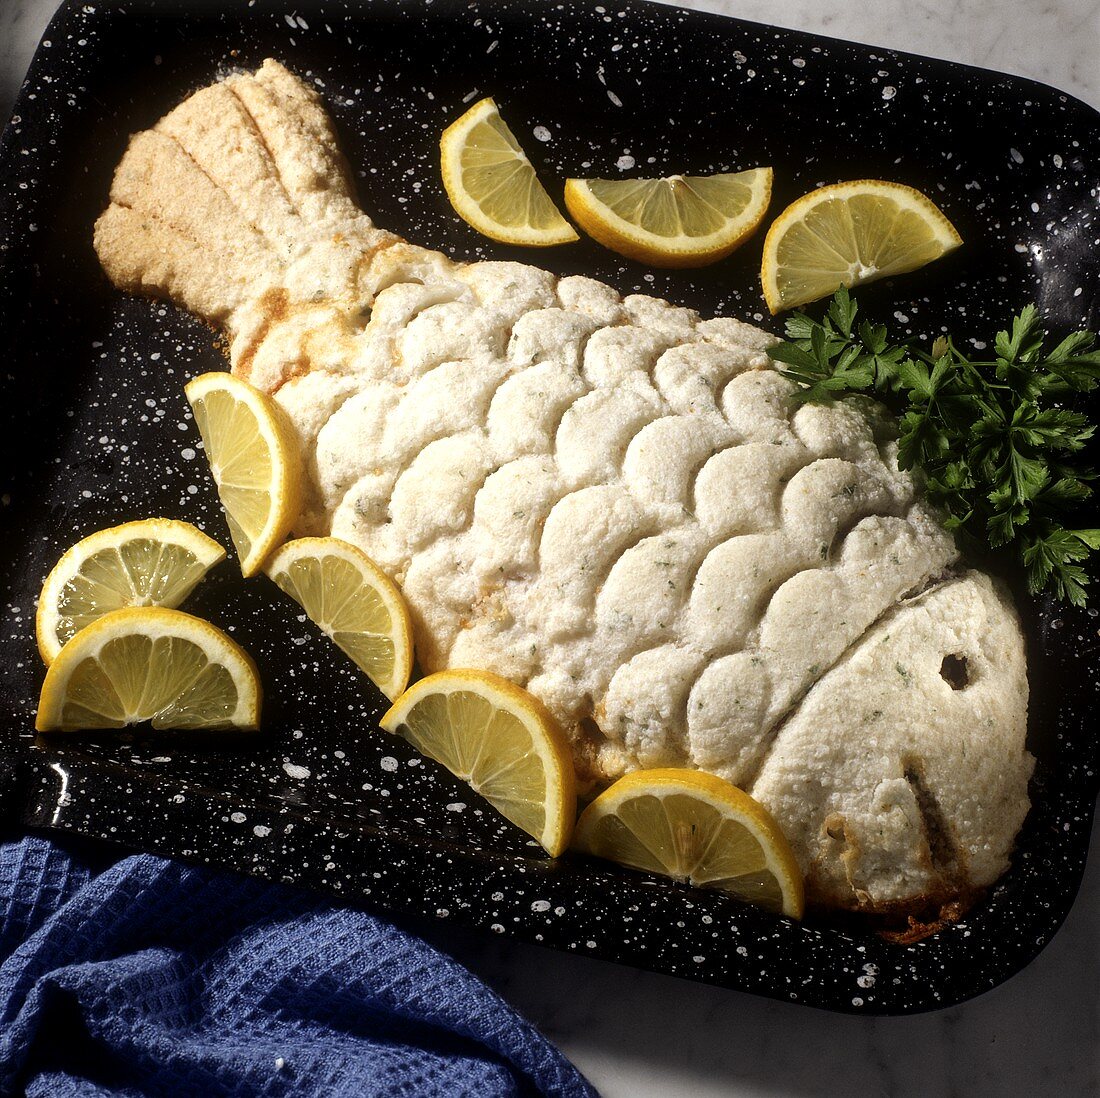 Fish in salt crust with lemon wedges on baking tray